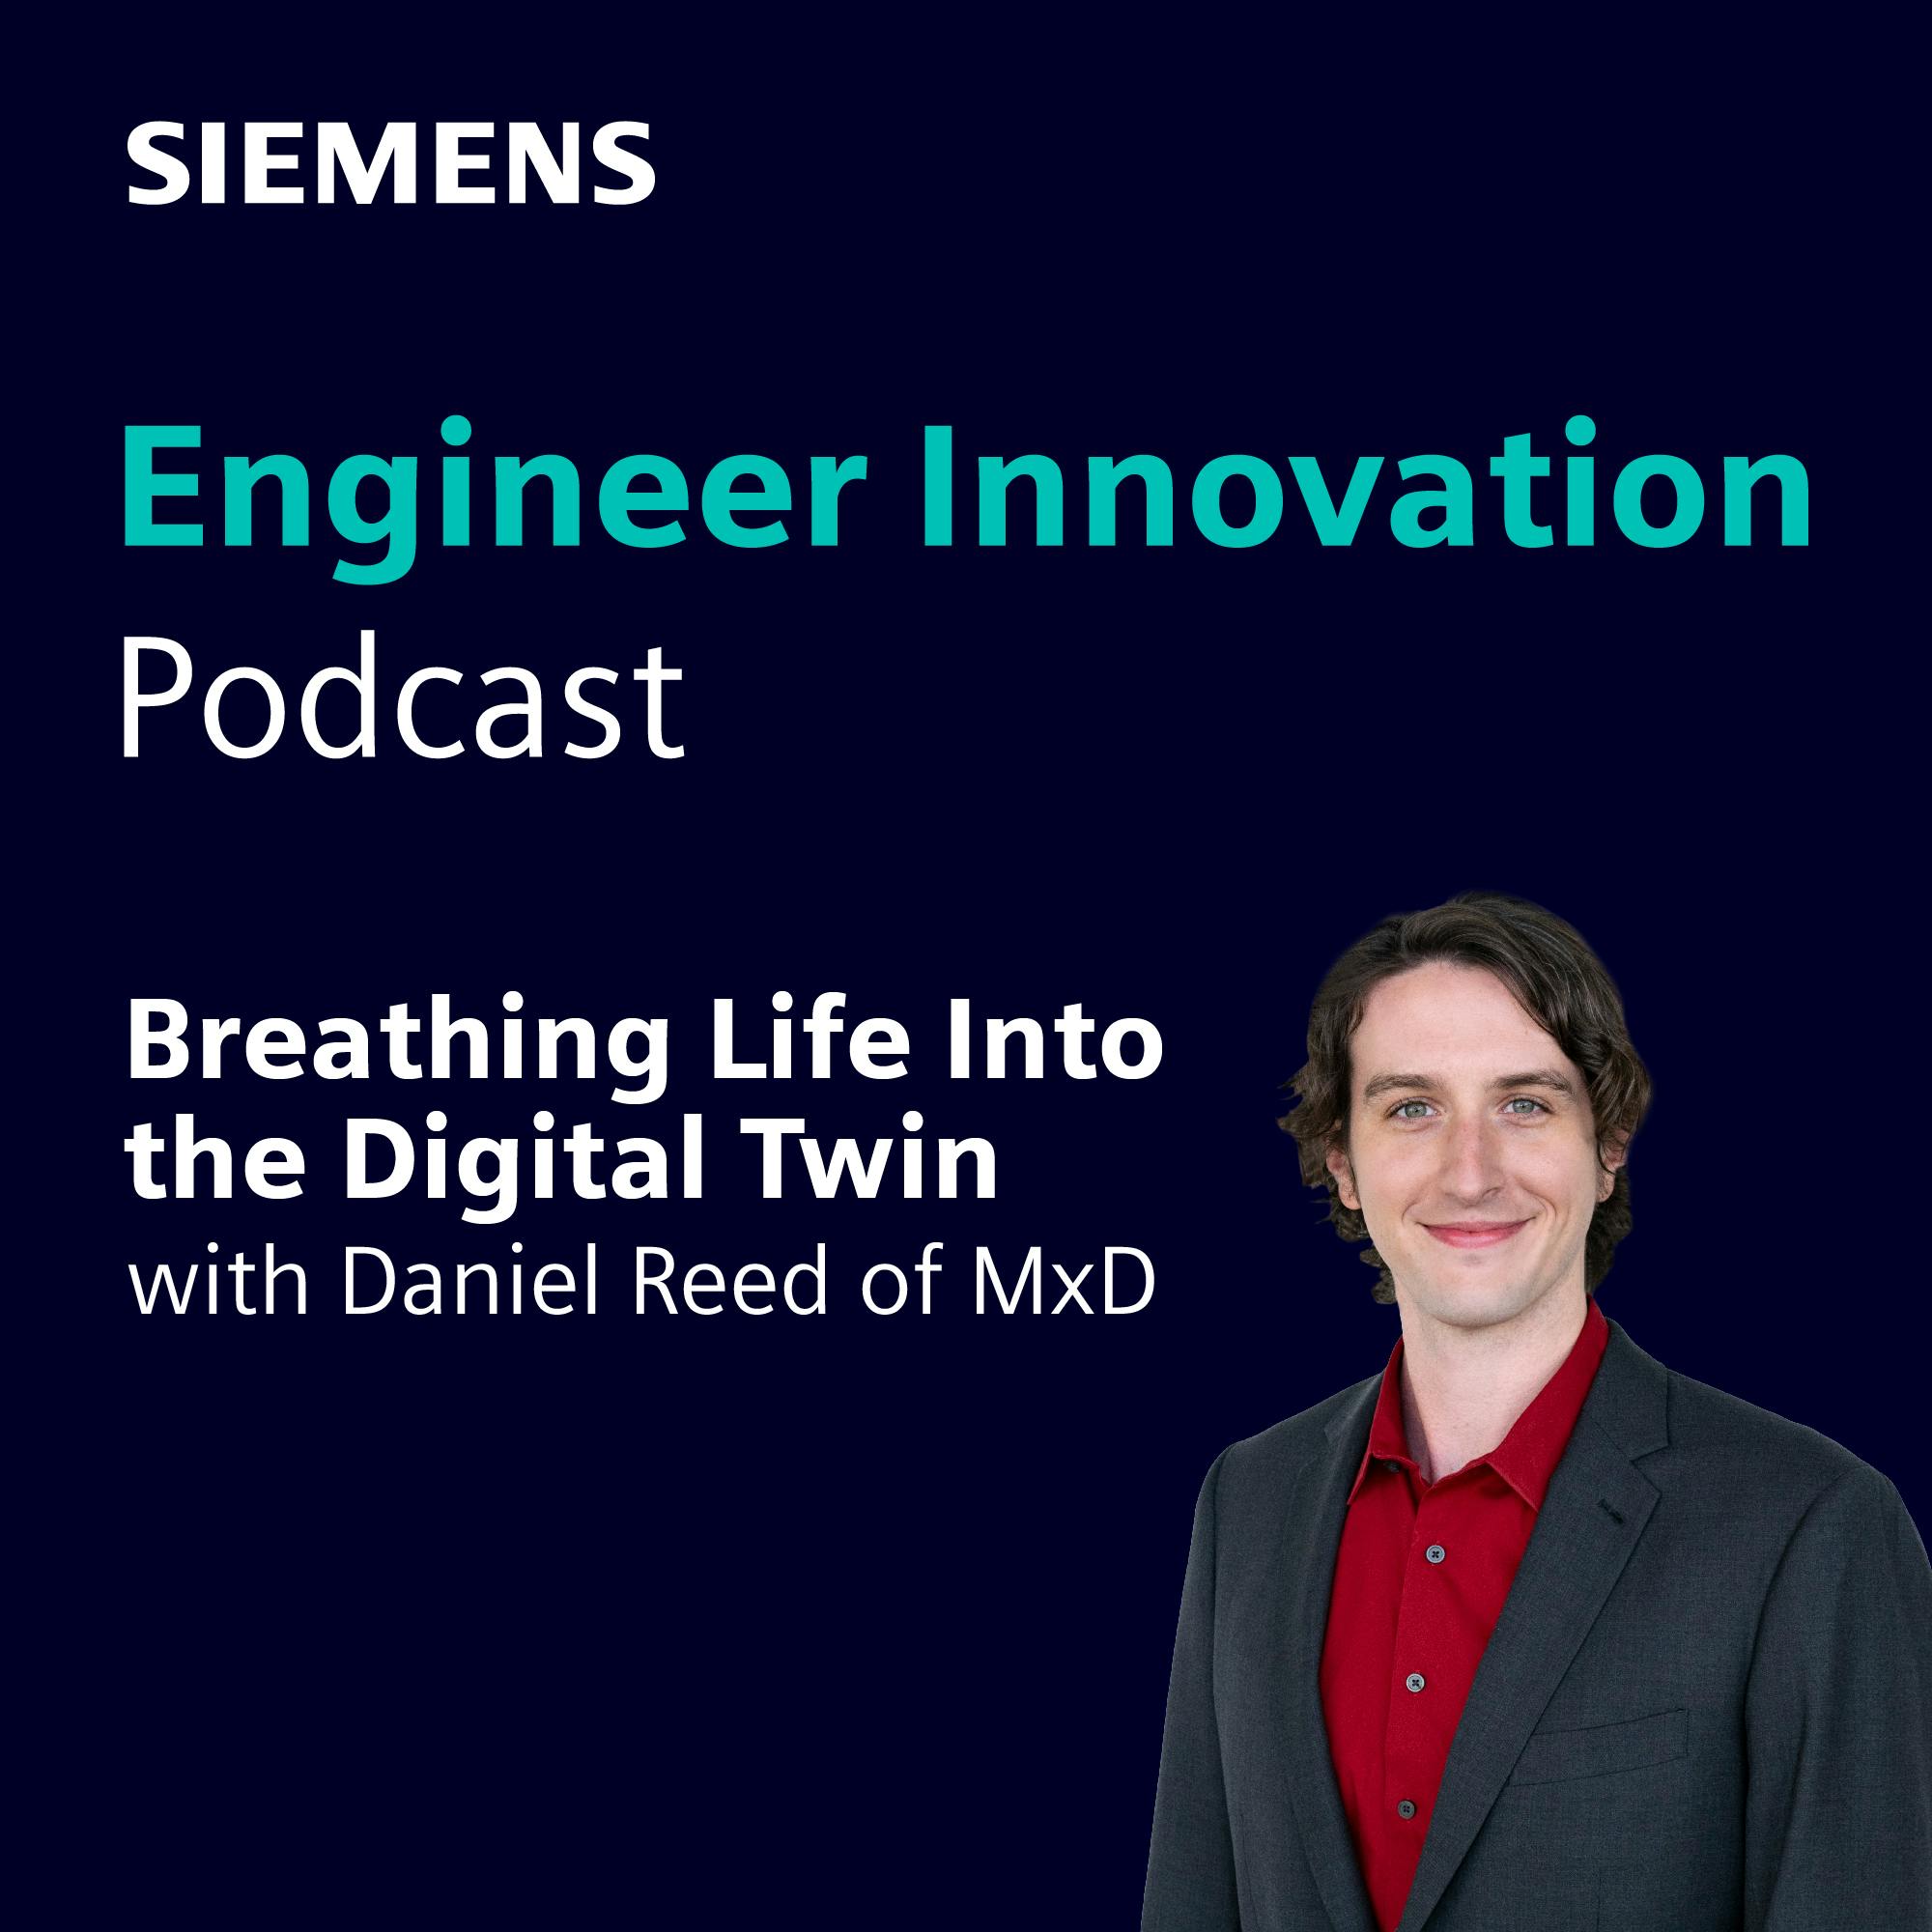 Breathing Life Into the Digital Twin with Daniel Reed at MxD